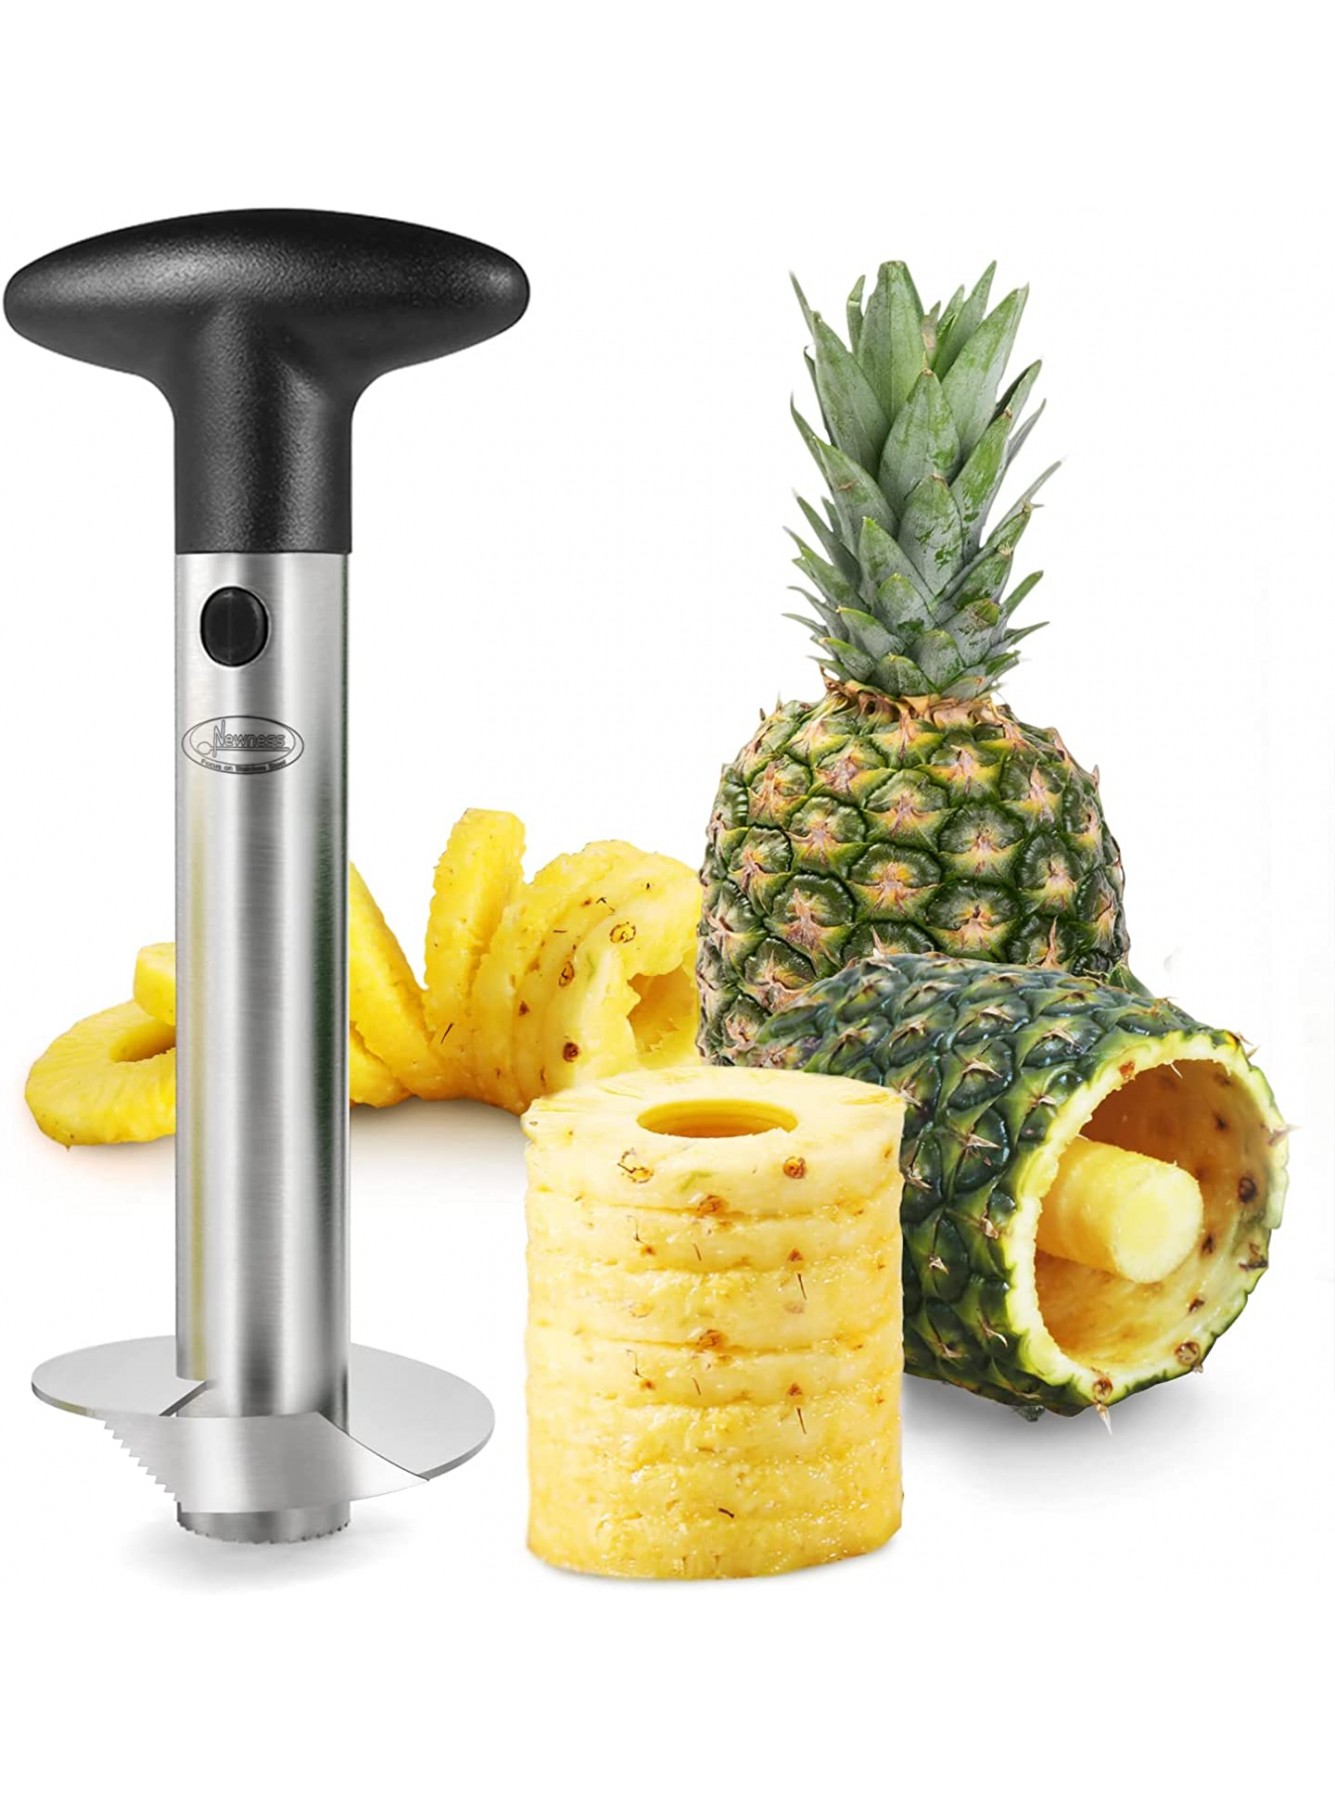 Pineapple Corer [Upgraded Reinforced Thicker Blade] Newness Premium Pineapple Corer Remover Black B06XCXQFXM